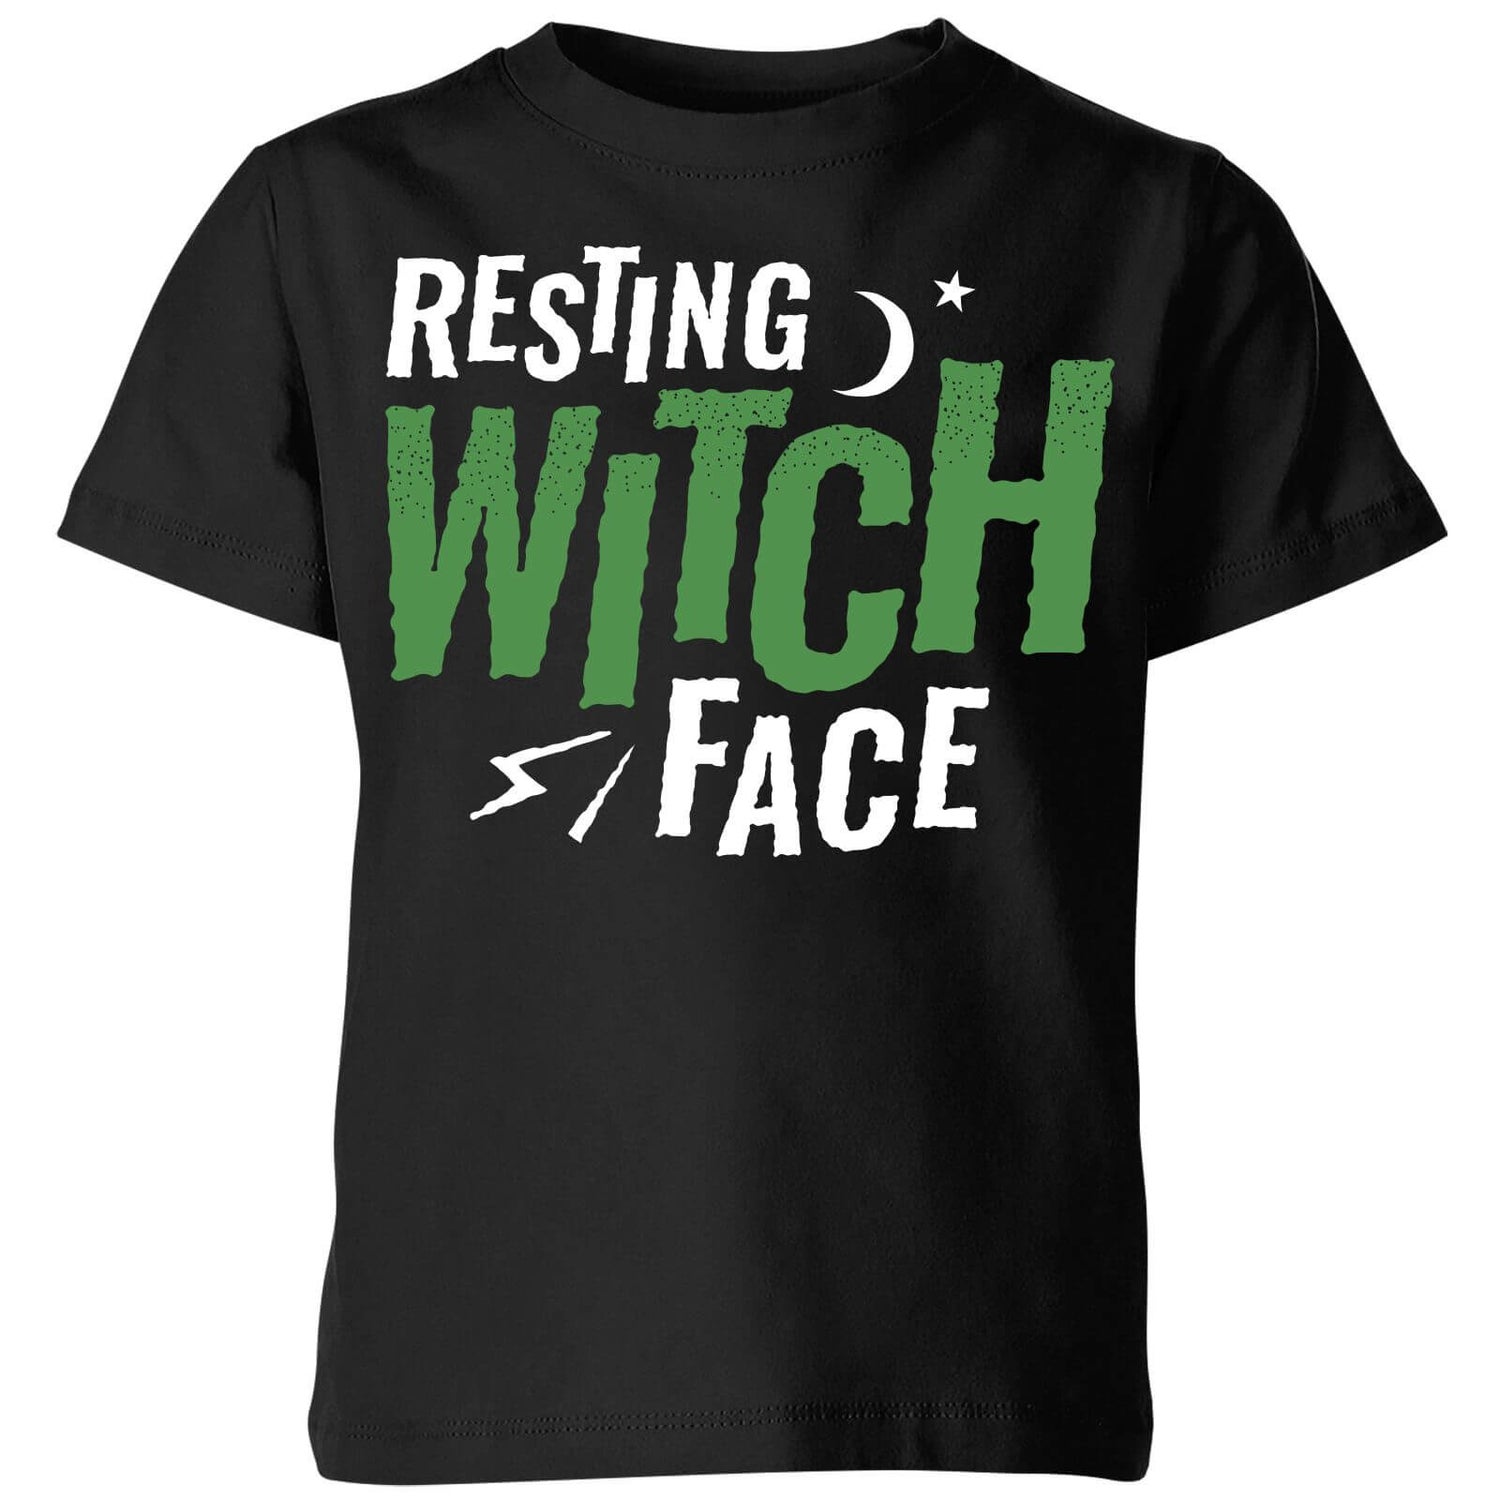 Resting Witch Face Kids' T-Shirt - Black